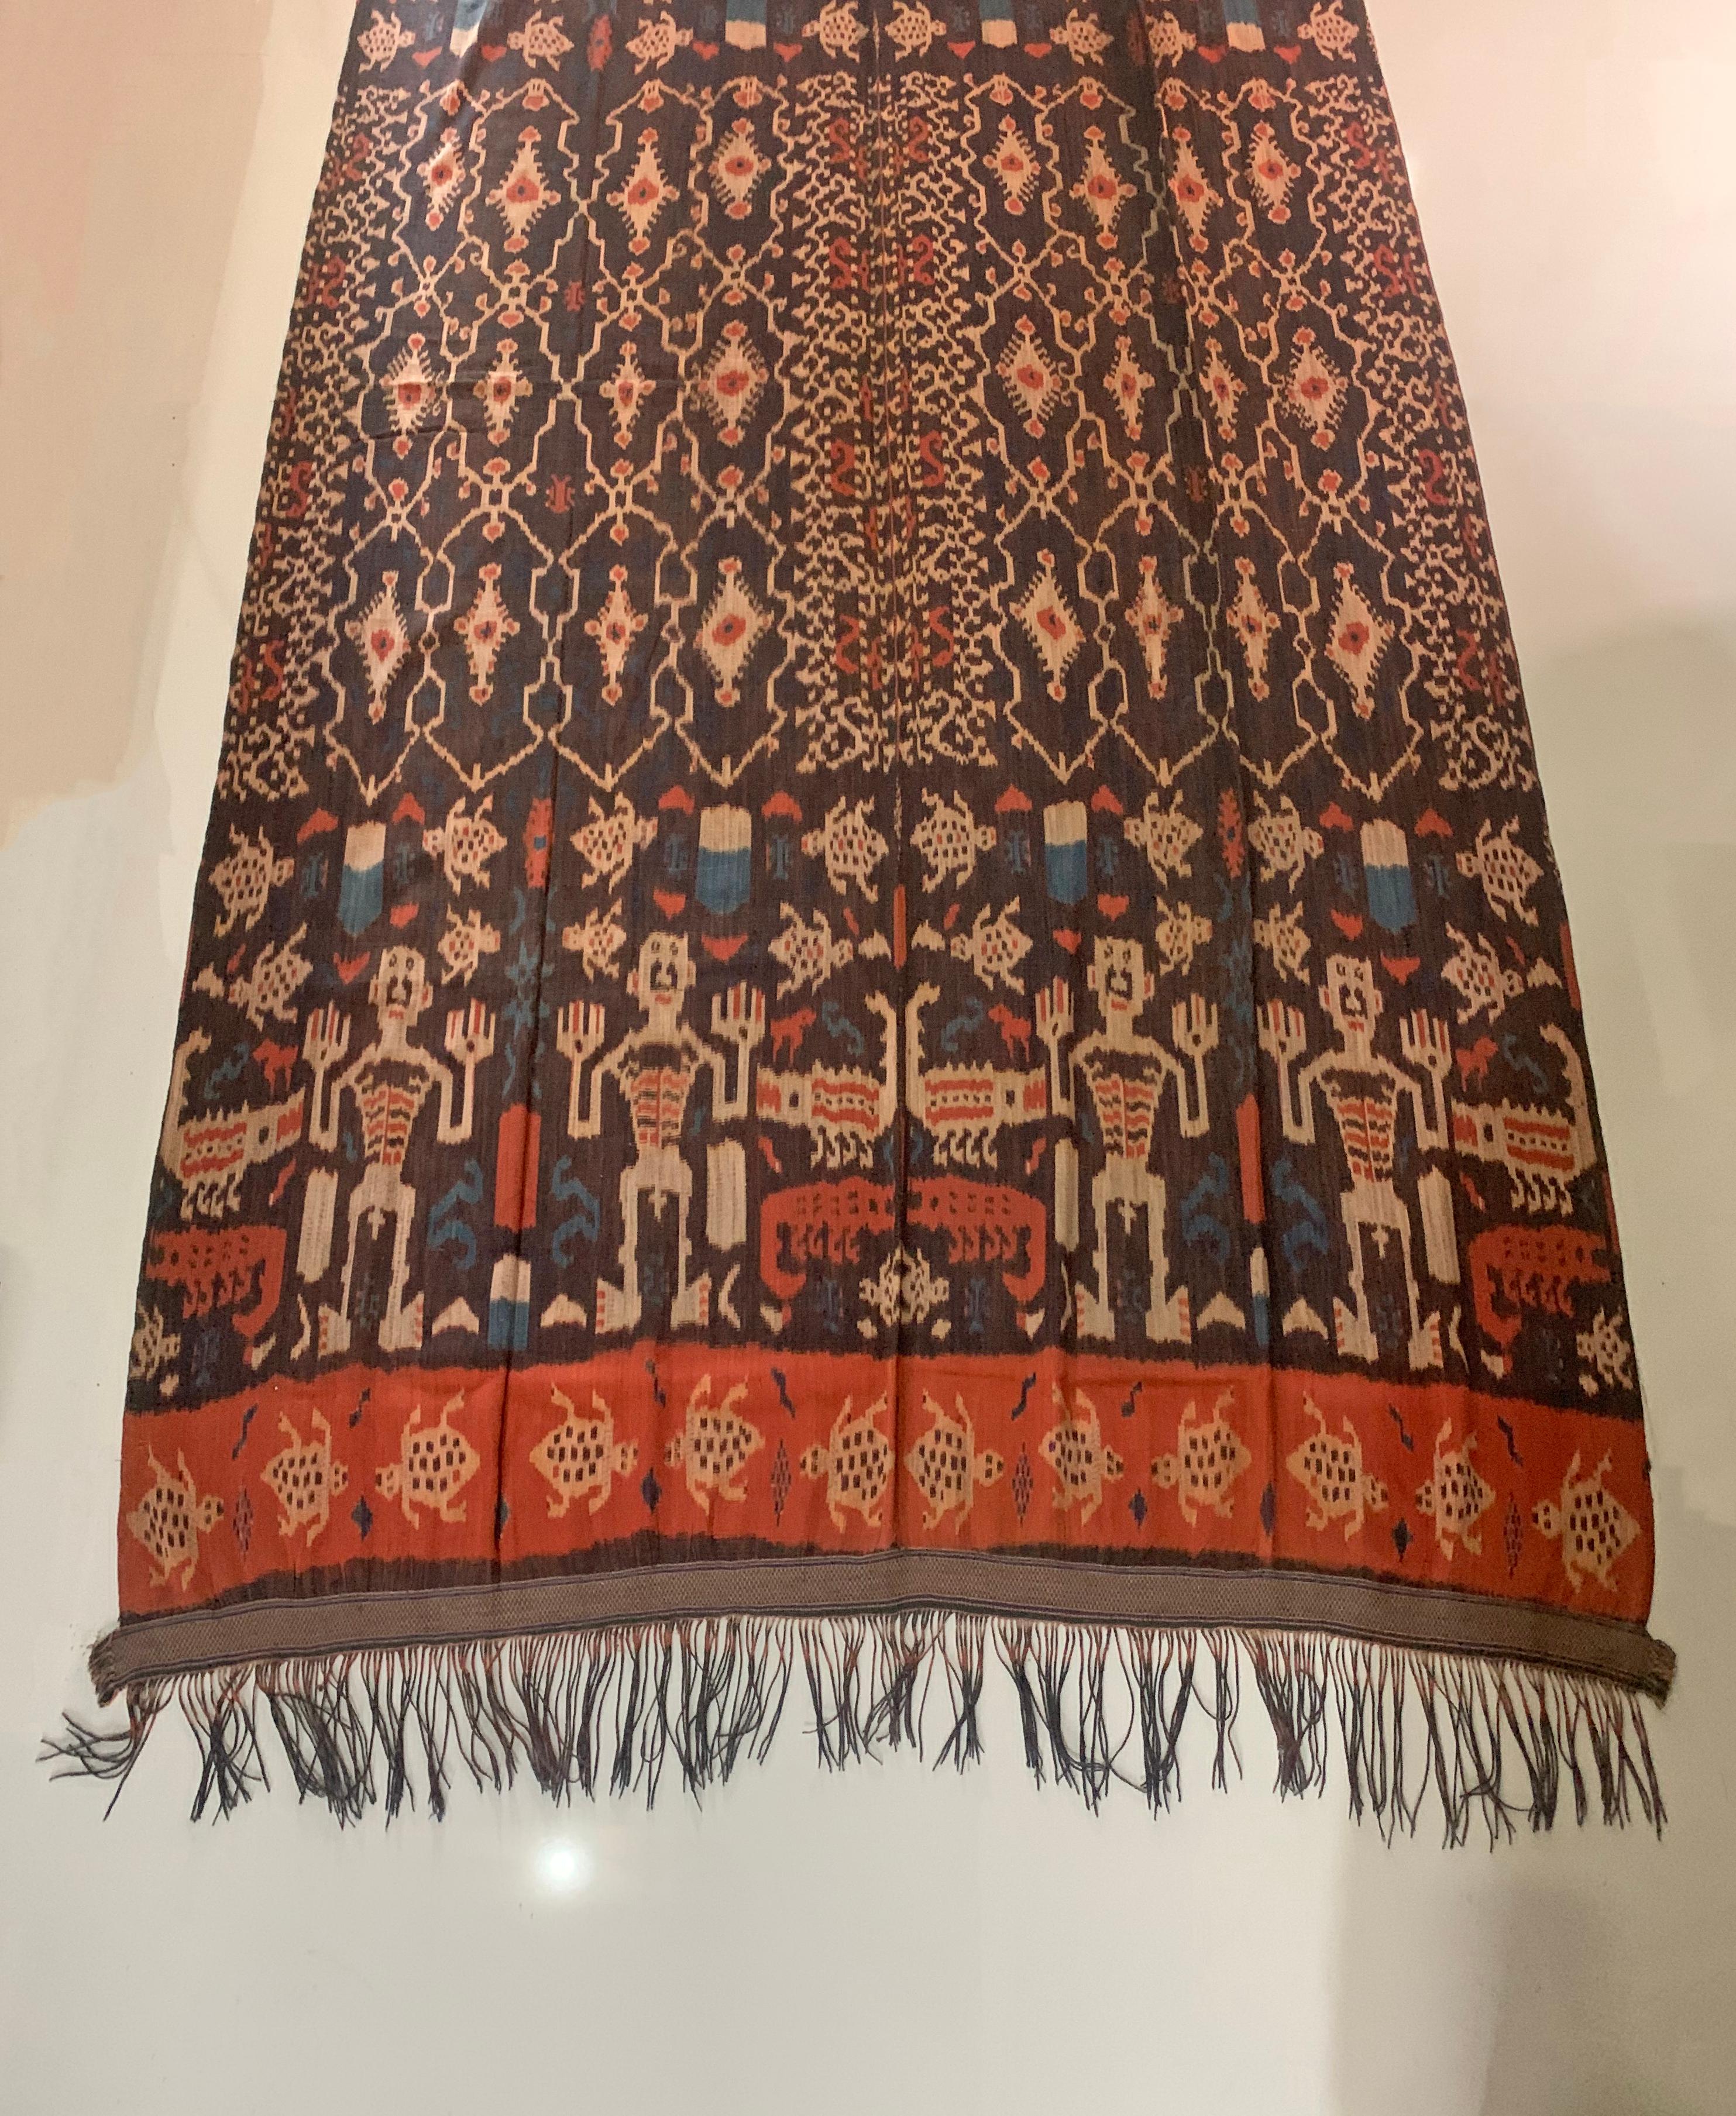 This Ikat textile originates from the Island of Sumba, Indonesia. It is hand-woven using naturally dyed yarns via a method passed on through generations. It features a stunning array of distinct tribal patterns as well as tribes men, crocodile &